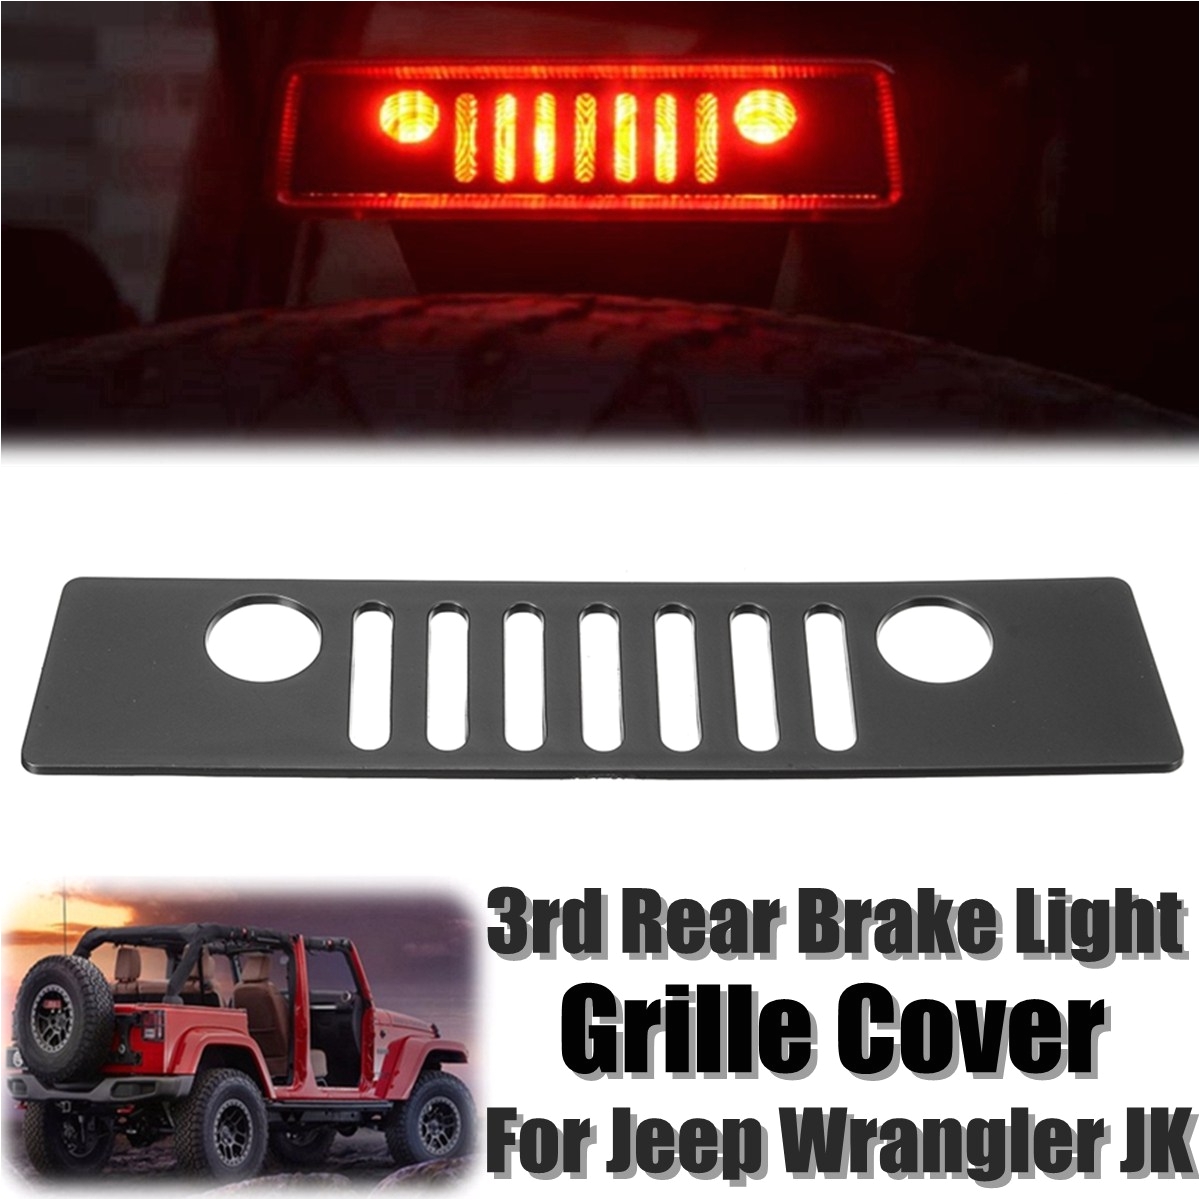 3rd car rear brake light cover decal grille for jeep for wrangler jk 2007 2008 2009 2010 2016 matte black new in shell from automobiles motorcycles on